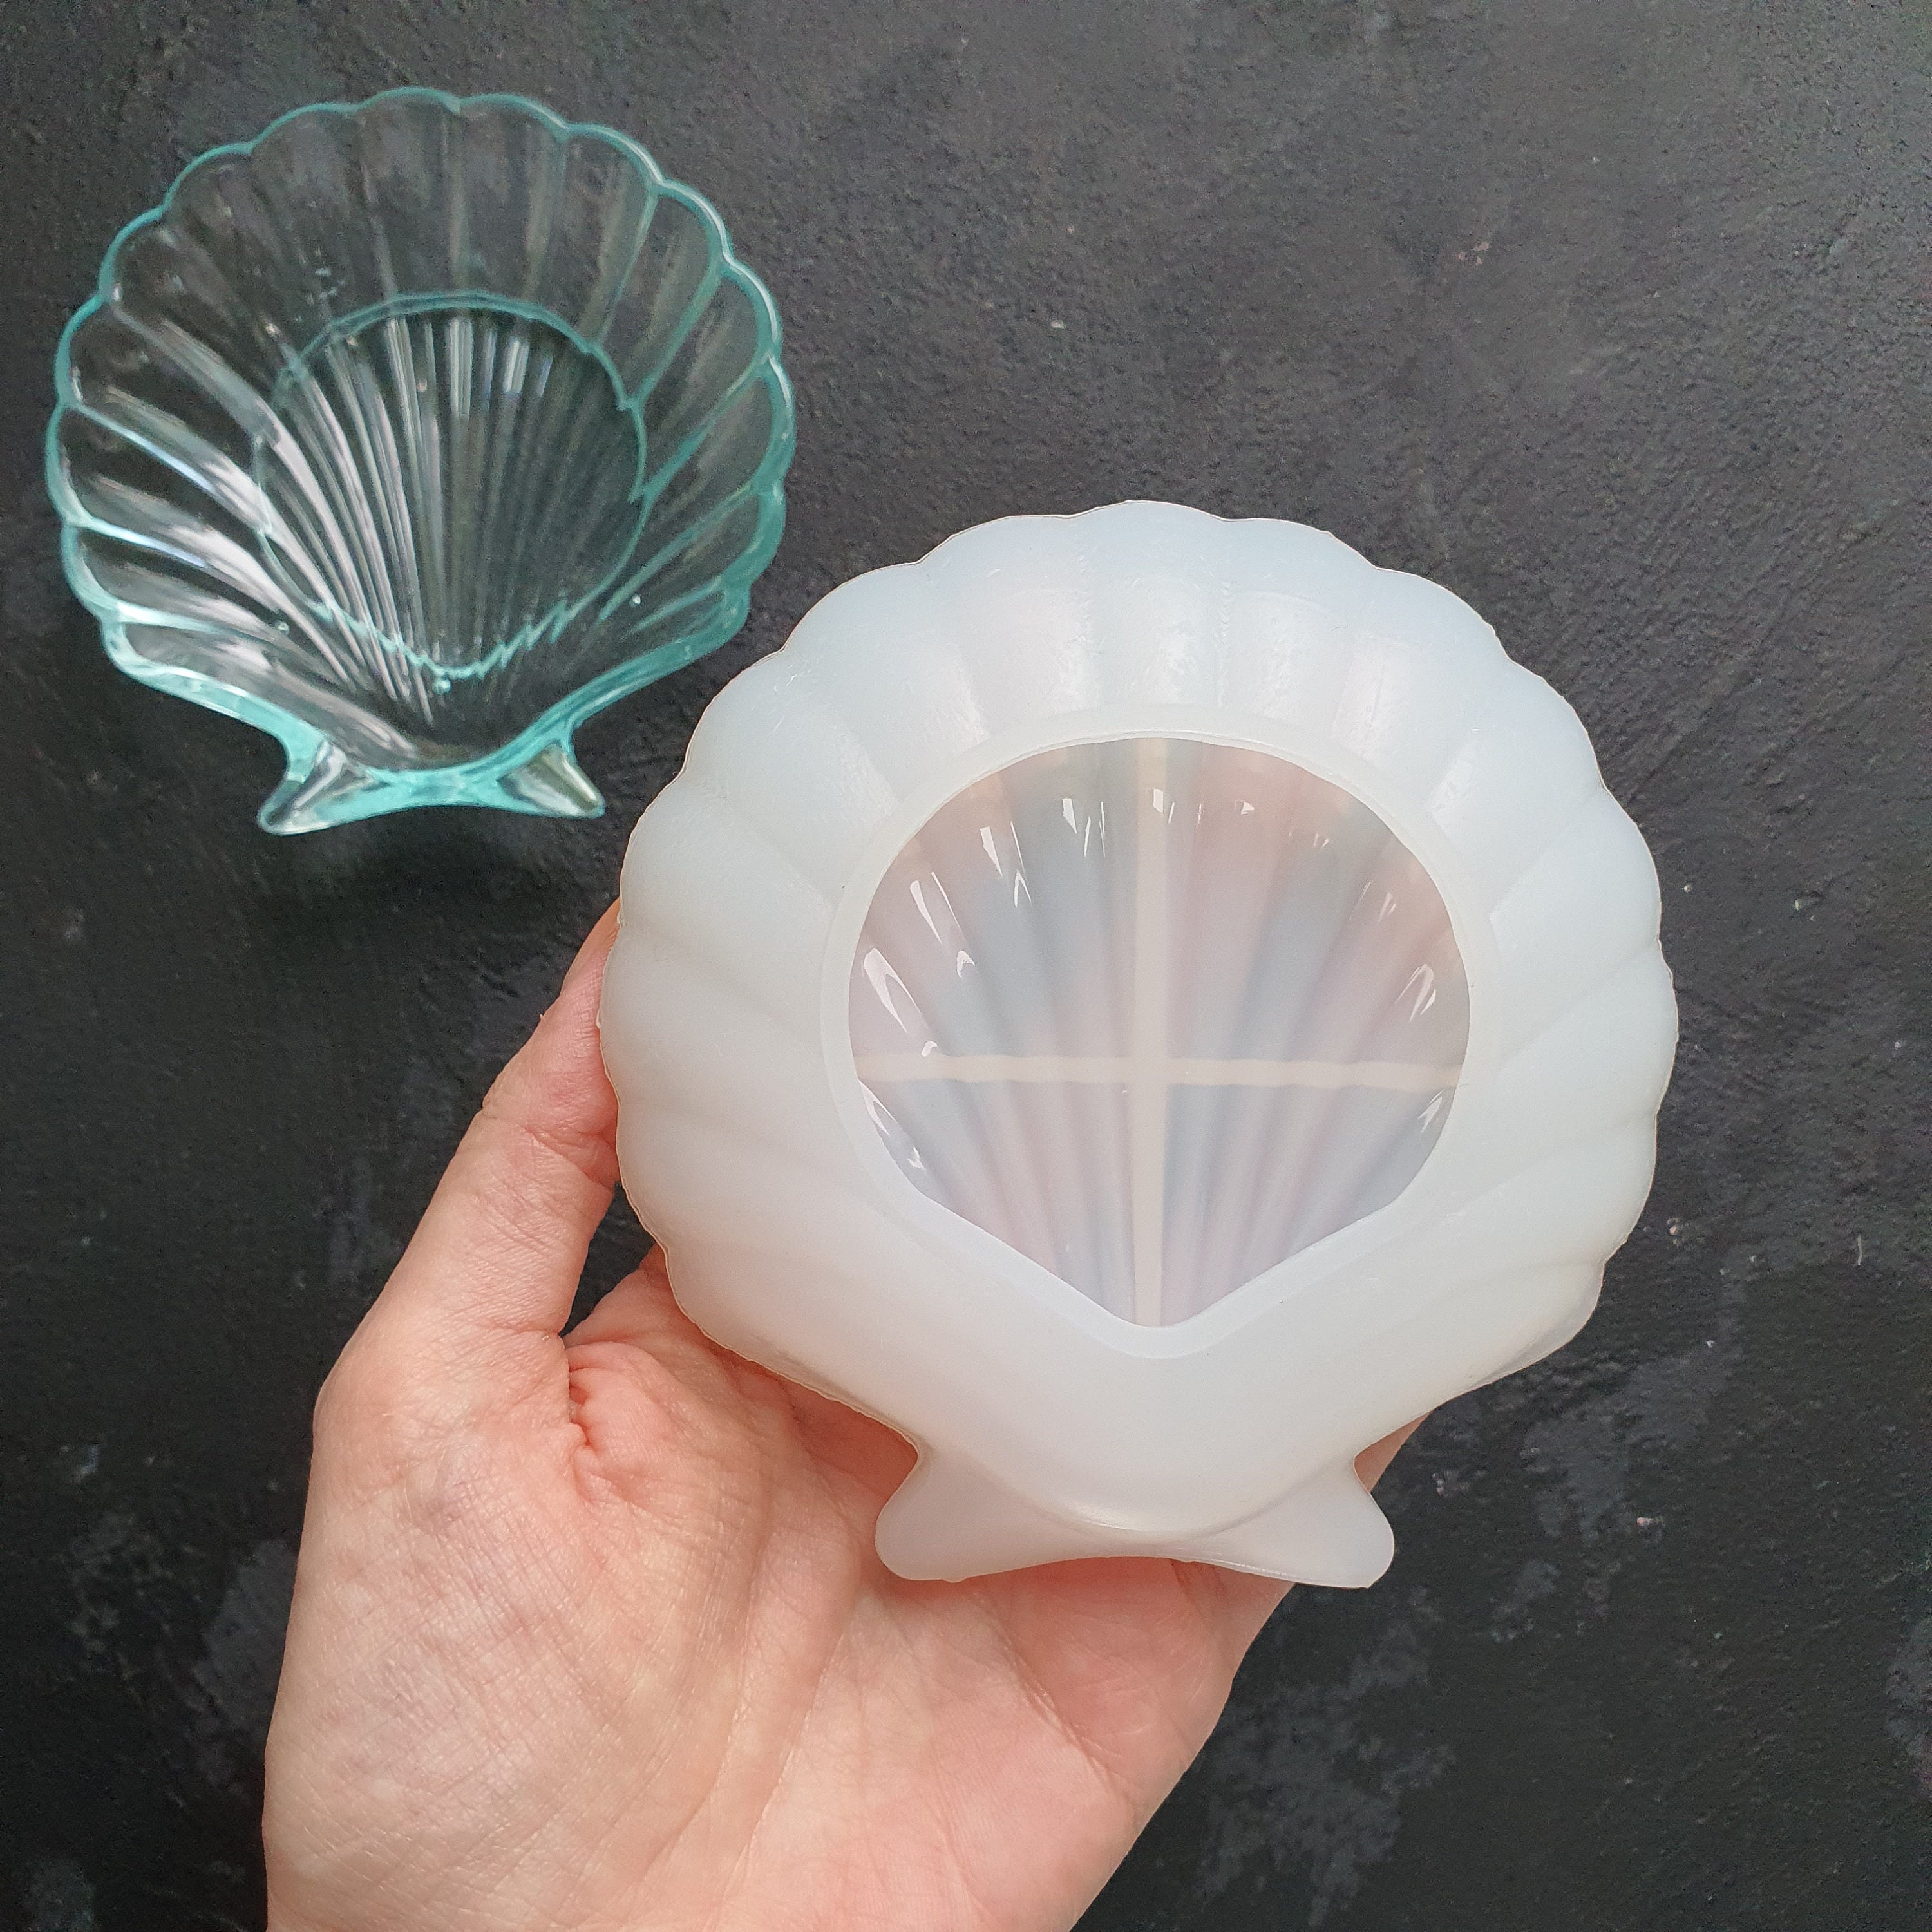 Sea Shell Box Resin Mold , Shell Mold for Silicone , Shell Epoxy Mold ,  Jewelry Storage Mold , Accessories Box Making , Soap Holder Mold 